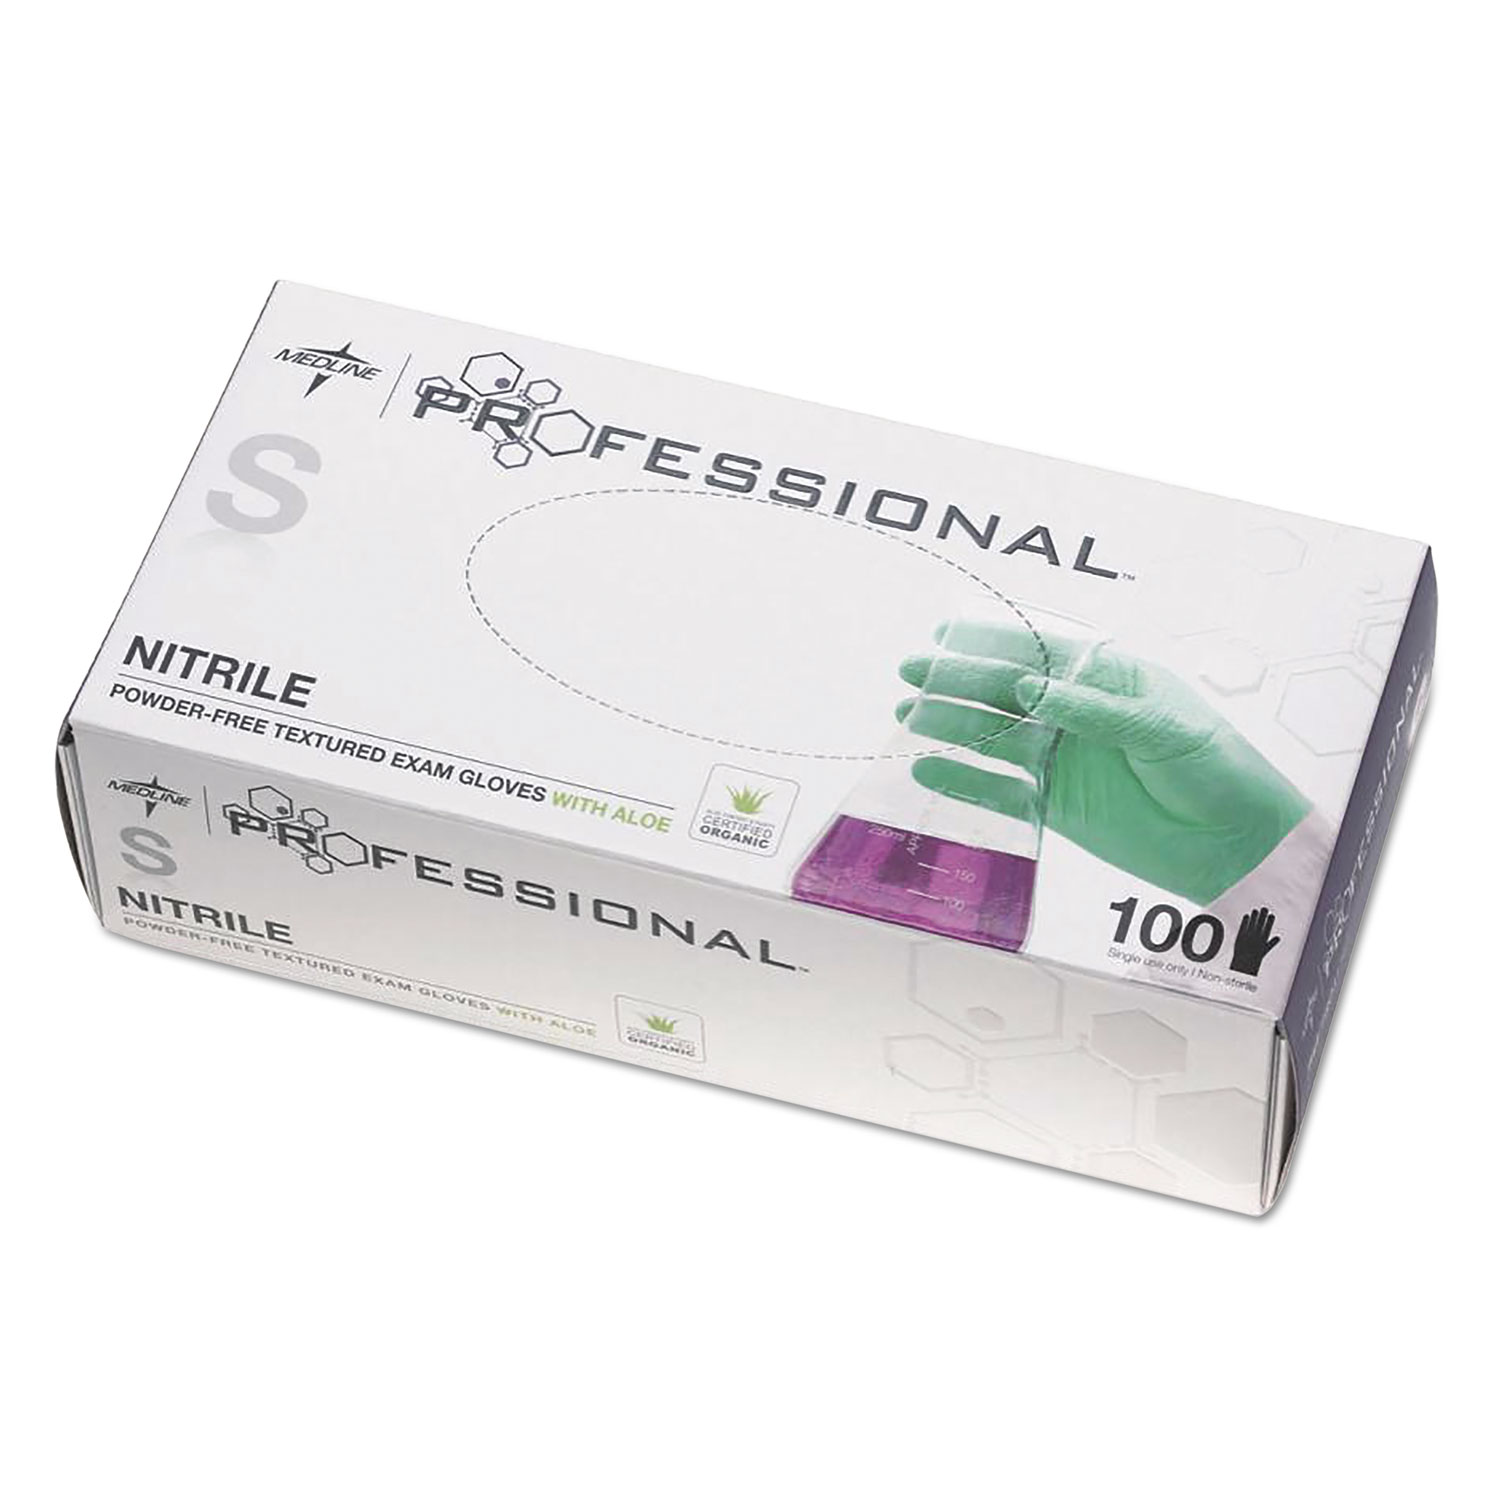  Medline PRO31761 Professional Nitrile Exam Gloves with Aloe, Small, Green, 100/Box (MIIPRO31761) 